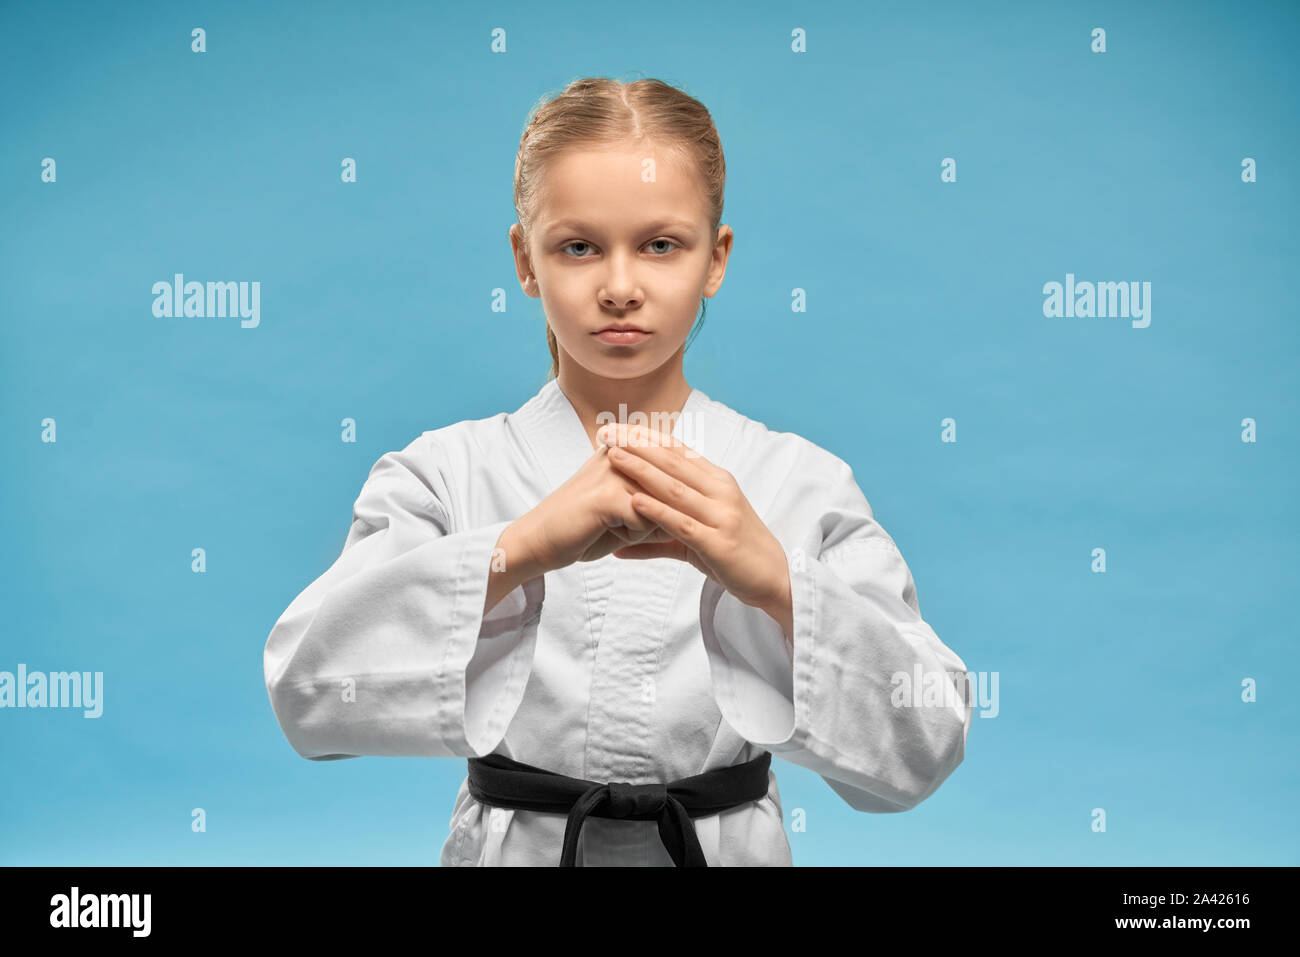 Young concentrated karate girl practicing hands position. Pretty junior in white kimono with black belt showing fist. Confident child posing on blue background, looking at camera. Stock Photo